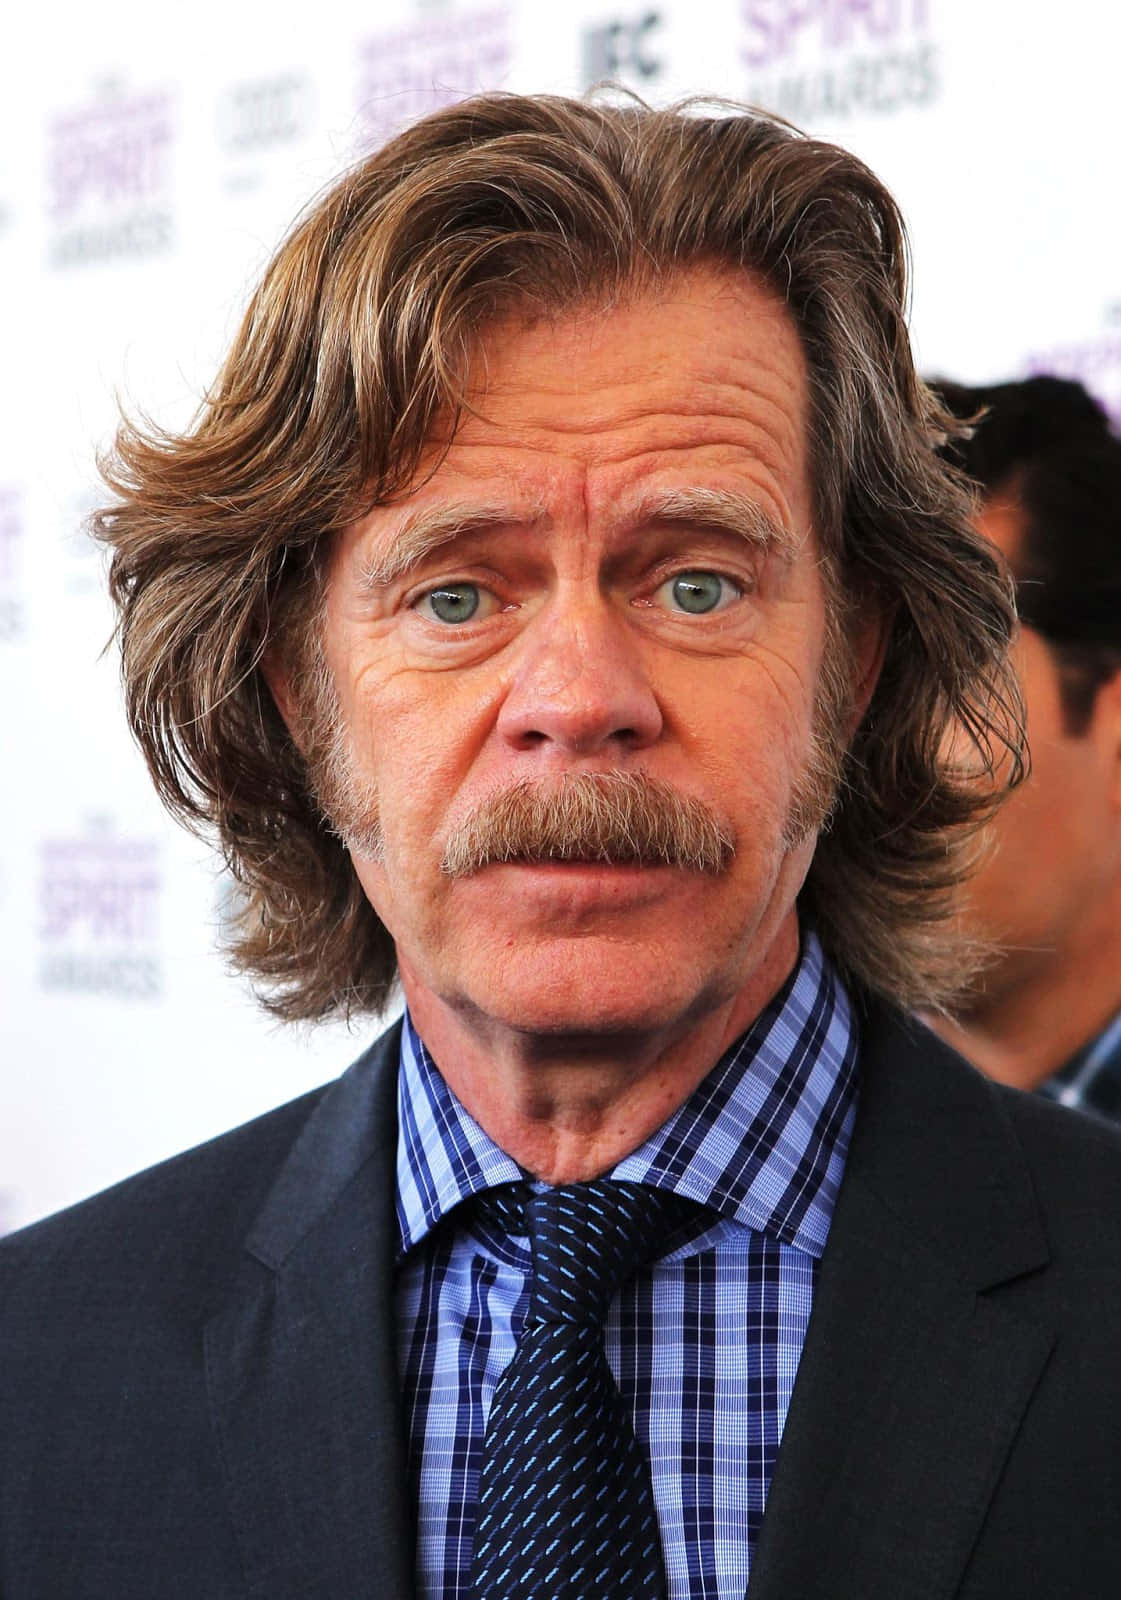 Award-winning Actor William H. Macy Posing For A Portrait Background